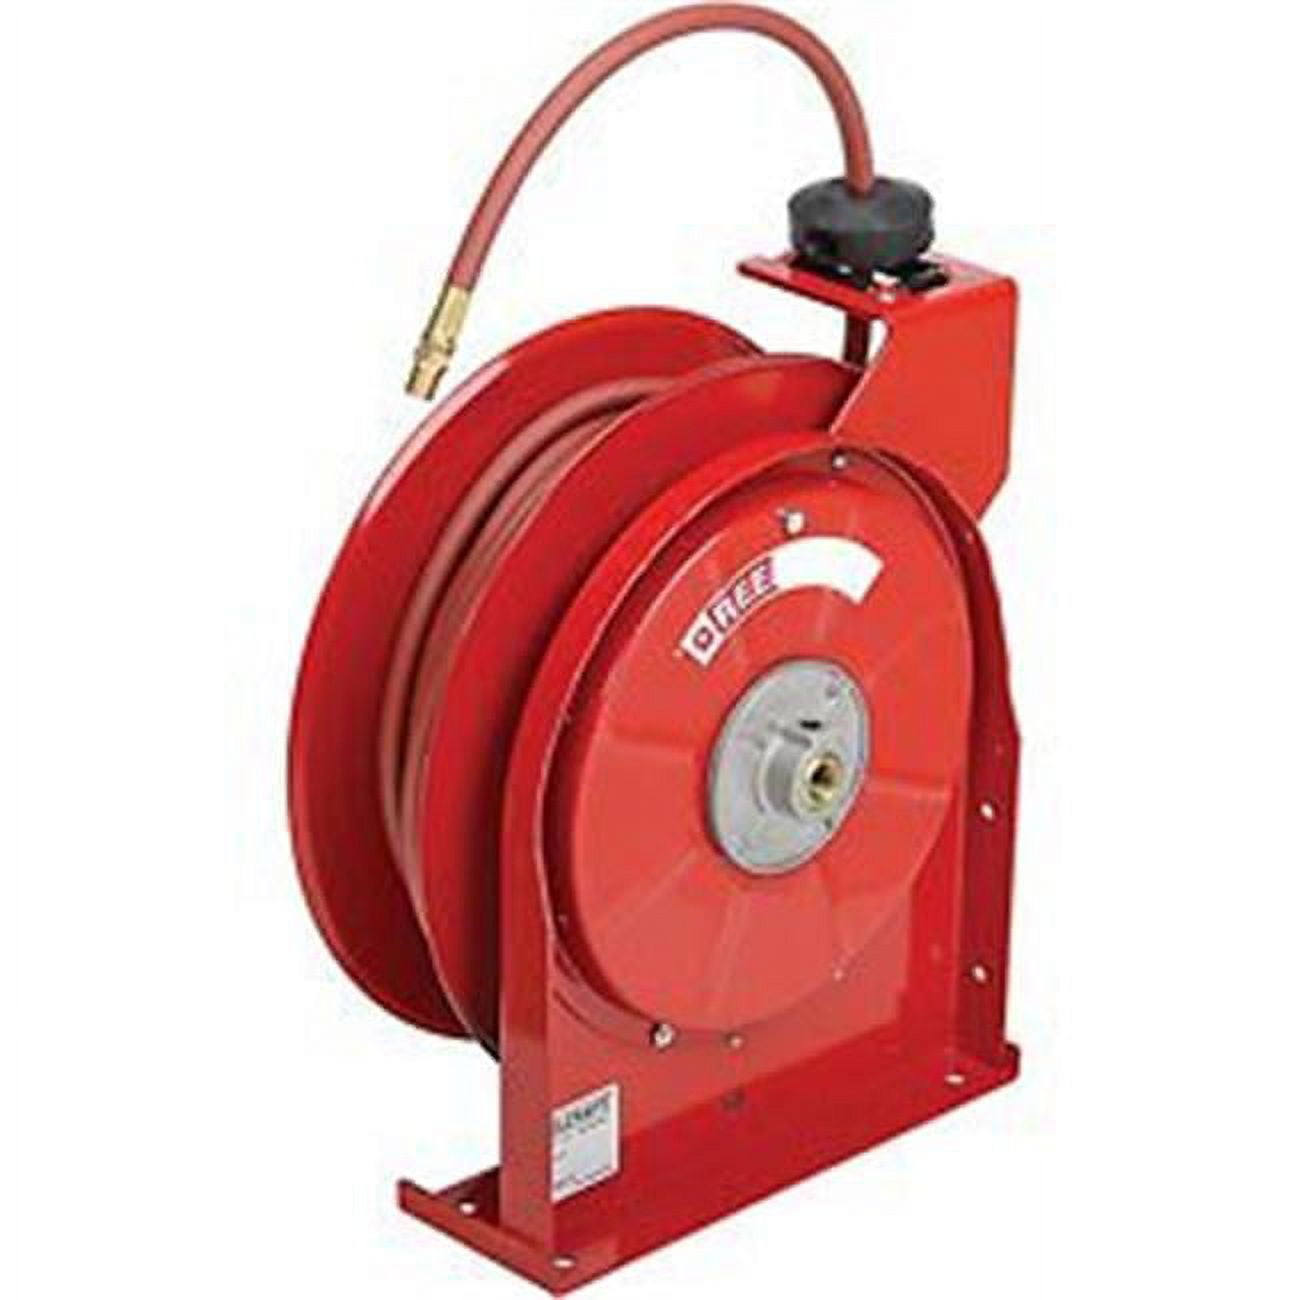 Reelcraft Premium Duty Compact Air/Water Hose Reel 